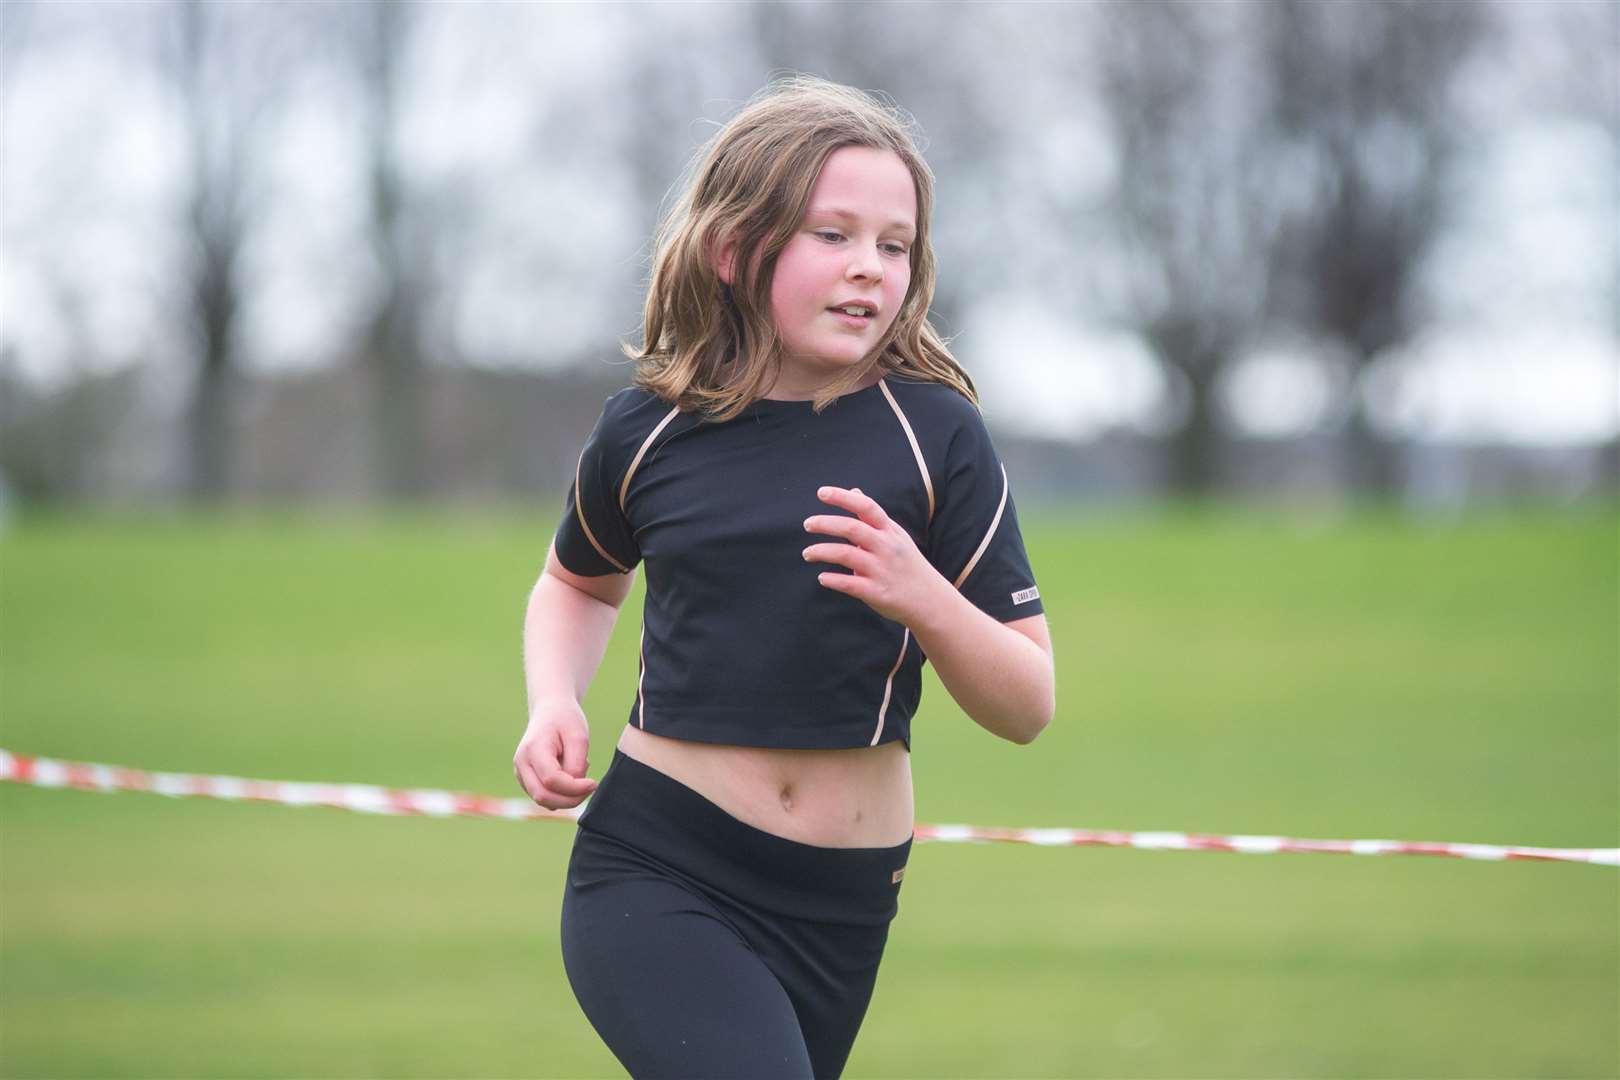 2nd overall in the Primary 6-7 Girls race - Milly Watson from Pilmuir Primary School...Forres Harriers' organised Forres Primary Schools Cross Country, held at Grant Park, Forres...Picture: Daniel Forsyth..